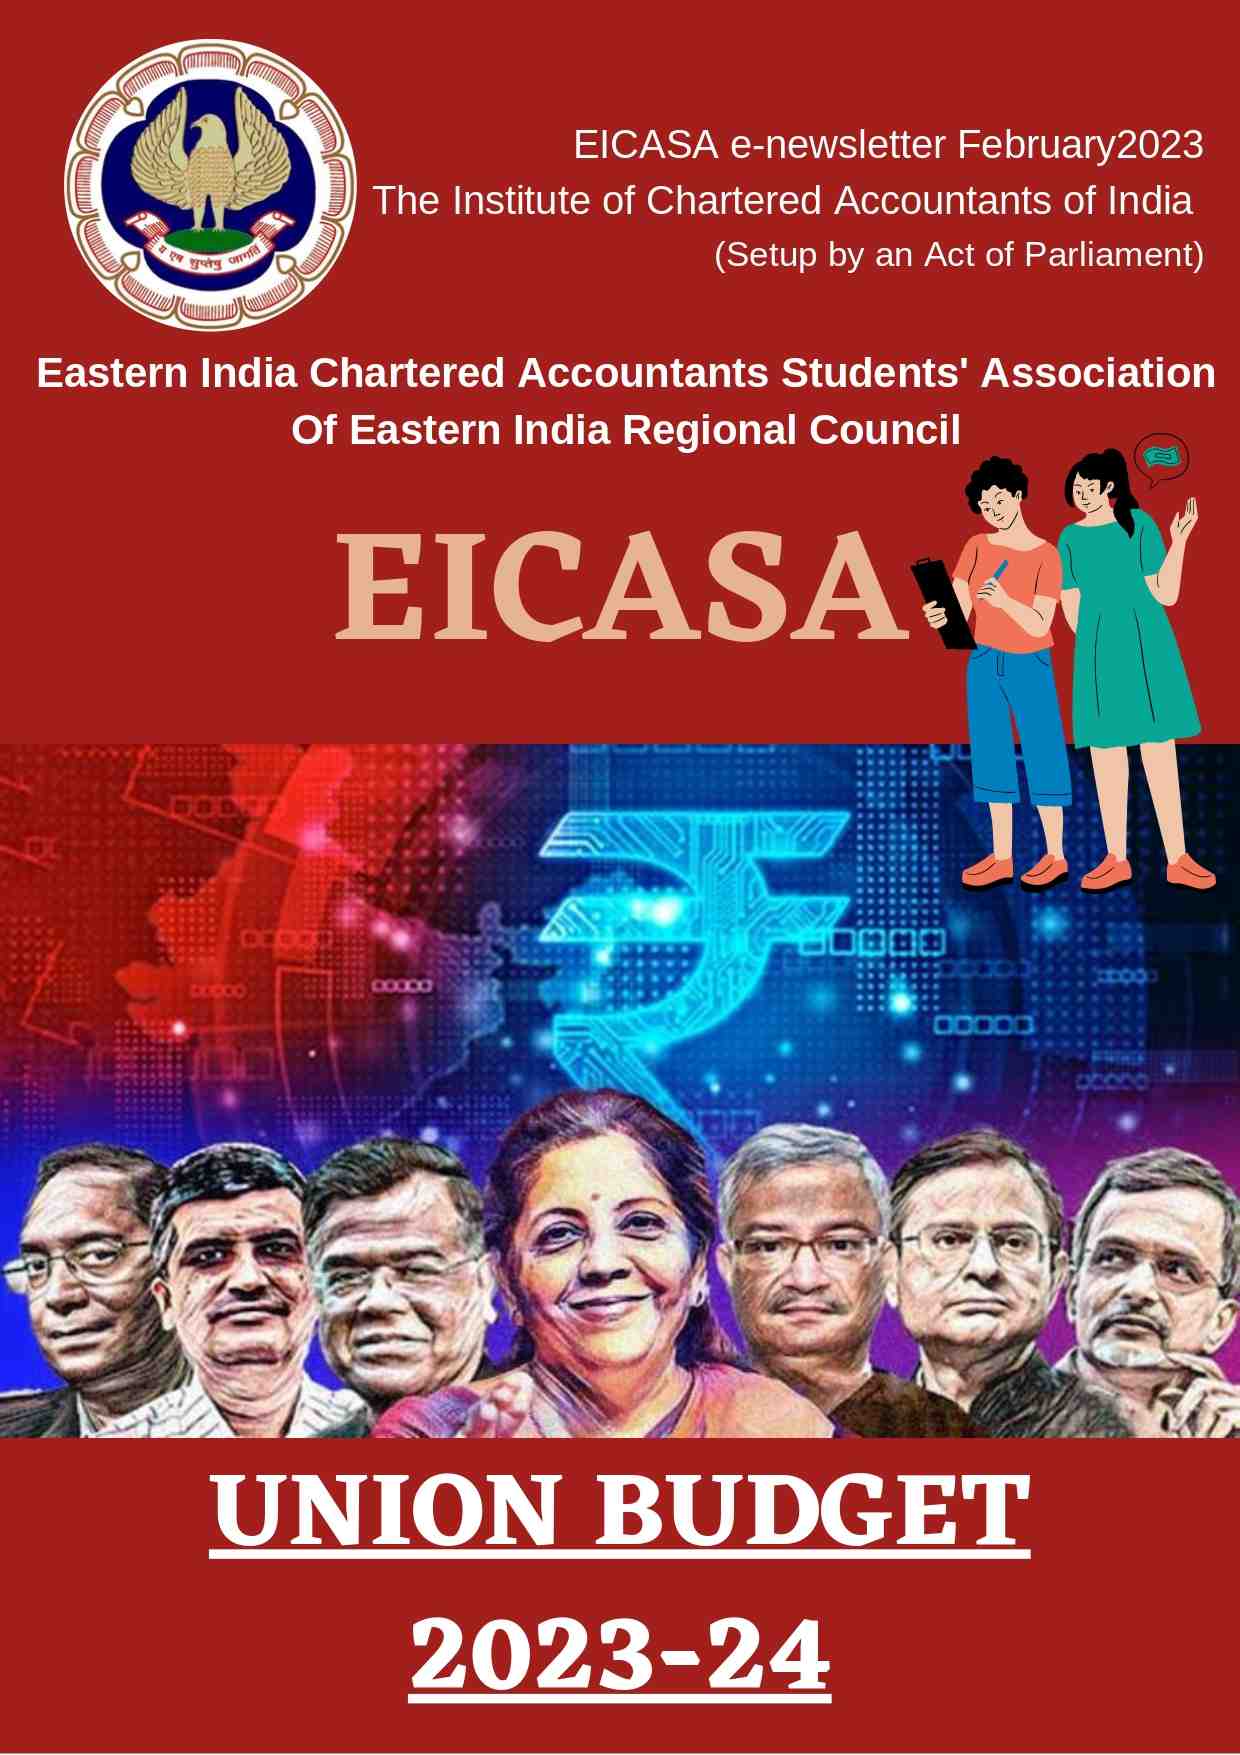 https://www.eirc-icai.org/uploads/newsletter/ENewsletter FebruaryCoverpage_page-0001_1681881906.jpg